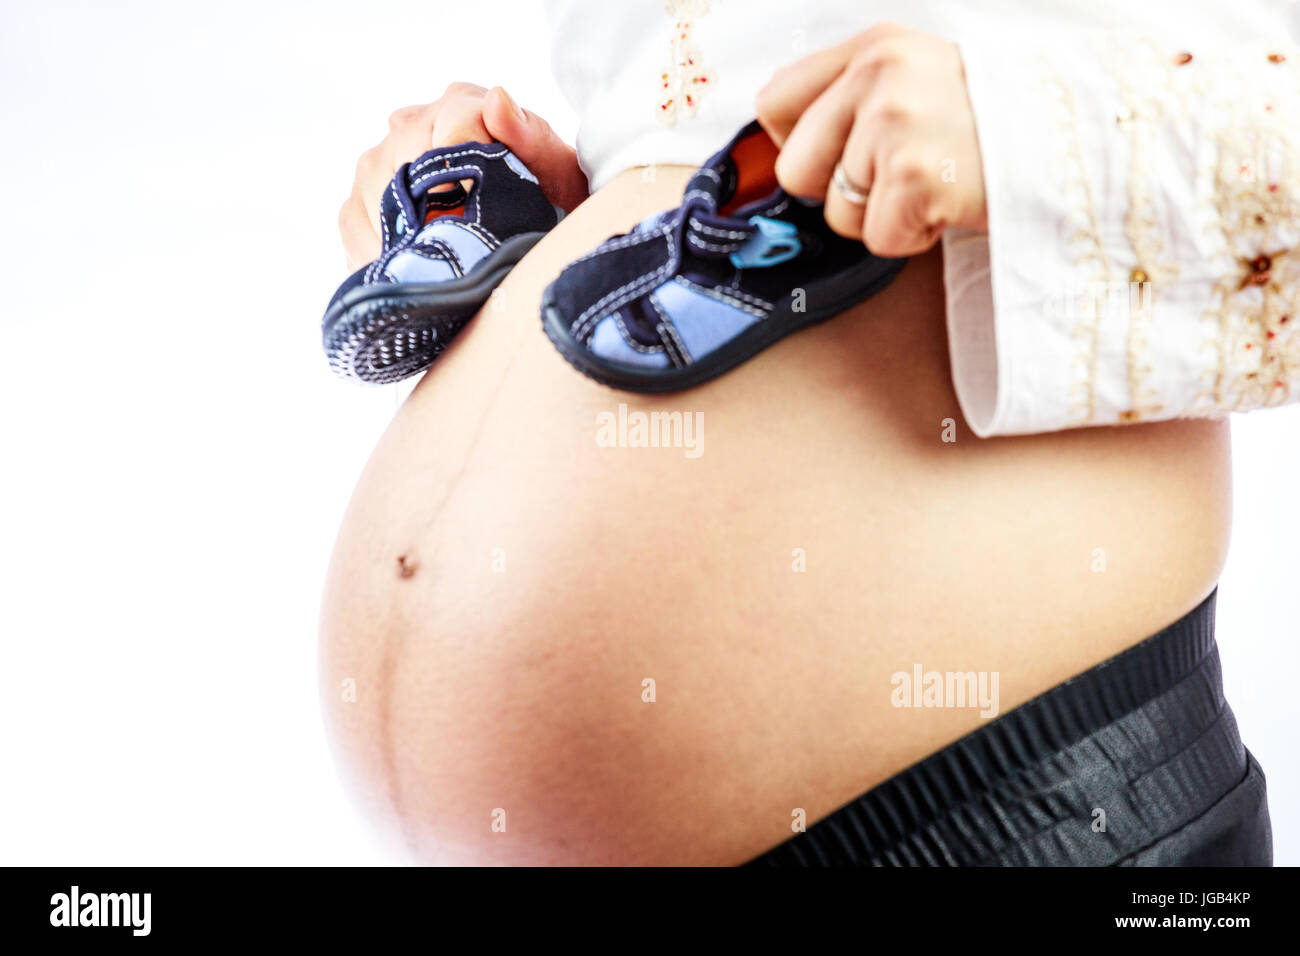 Pregnant woman with cute, small shoes for the baby on her belly. Stock Photo